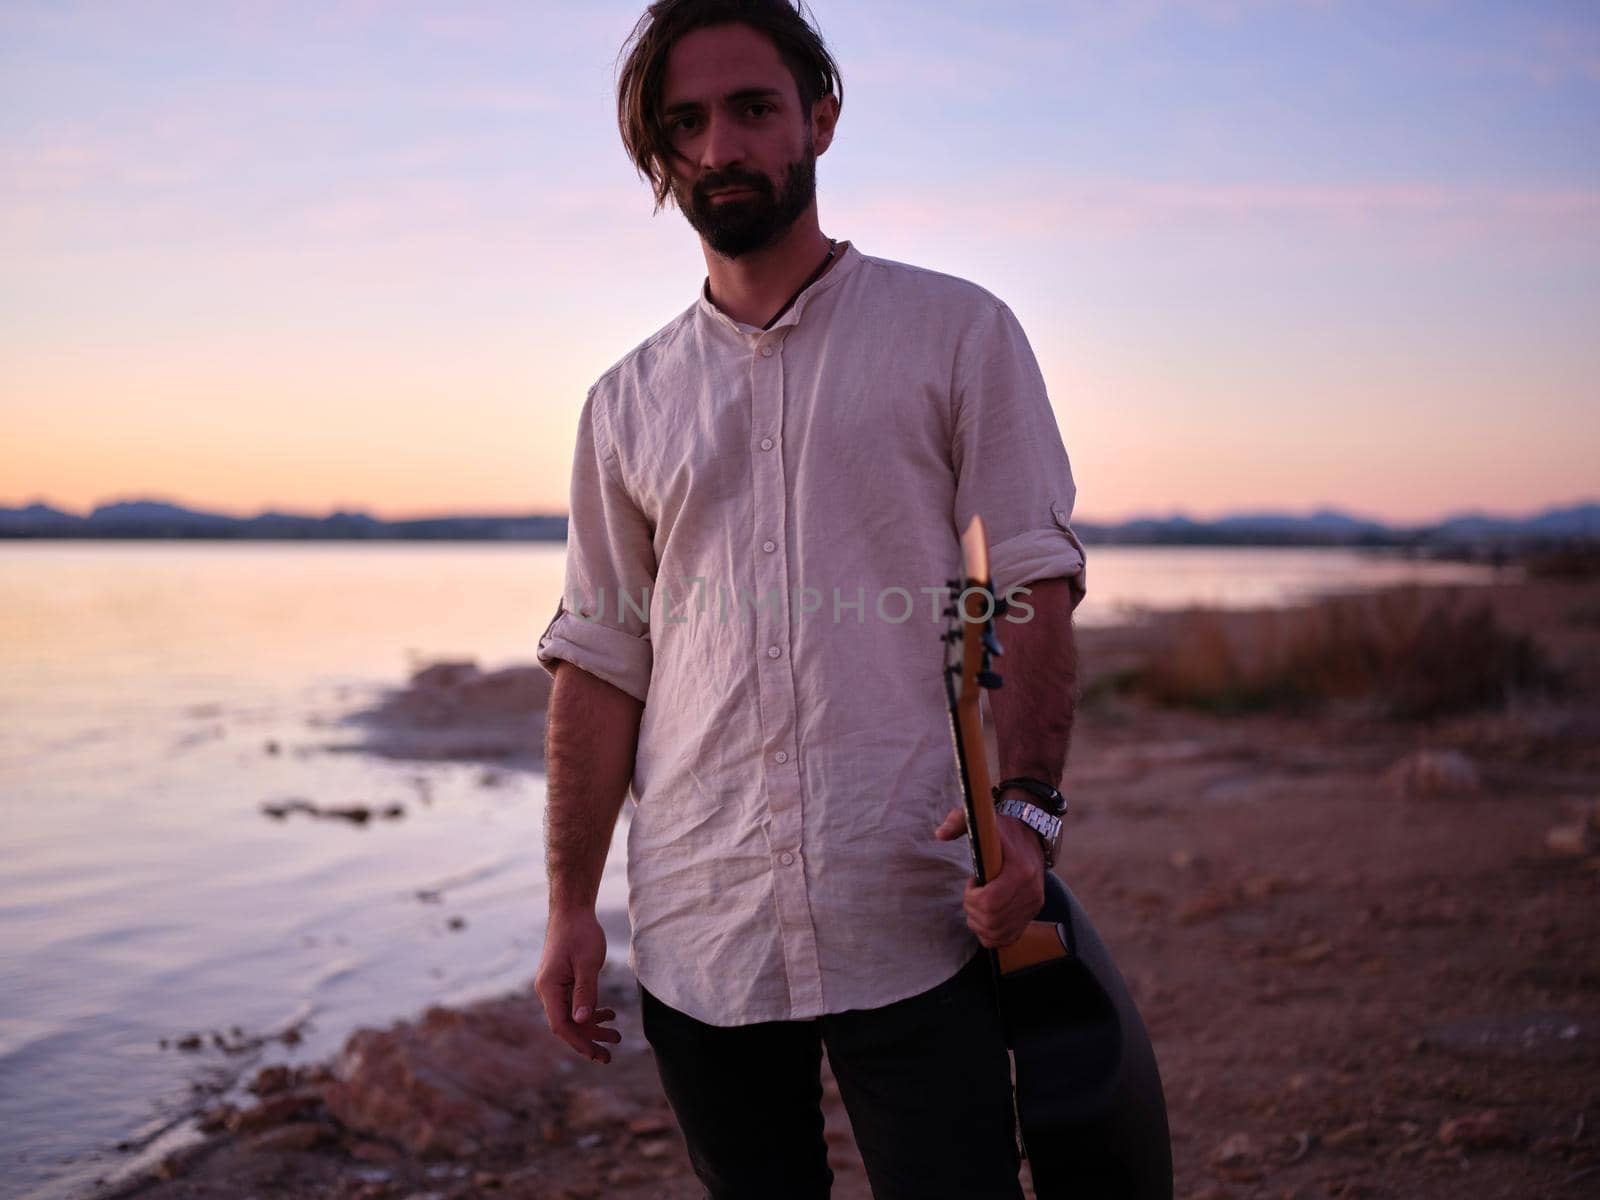 guitarist posing with his guitar next to the pink lake, horizontal portrait during dusk